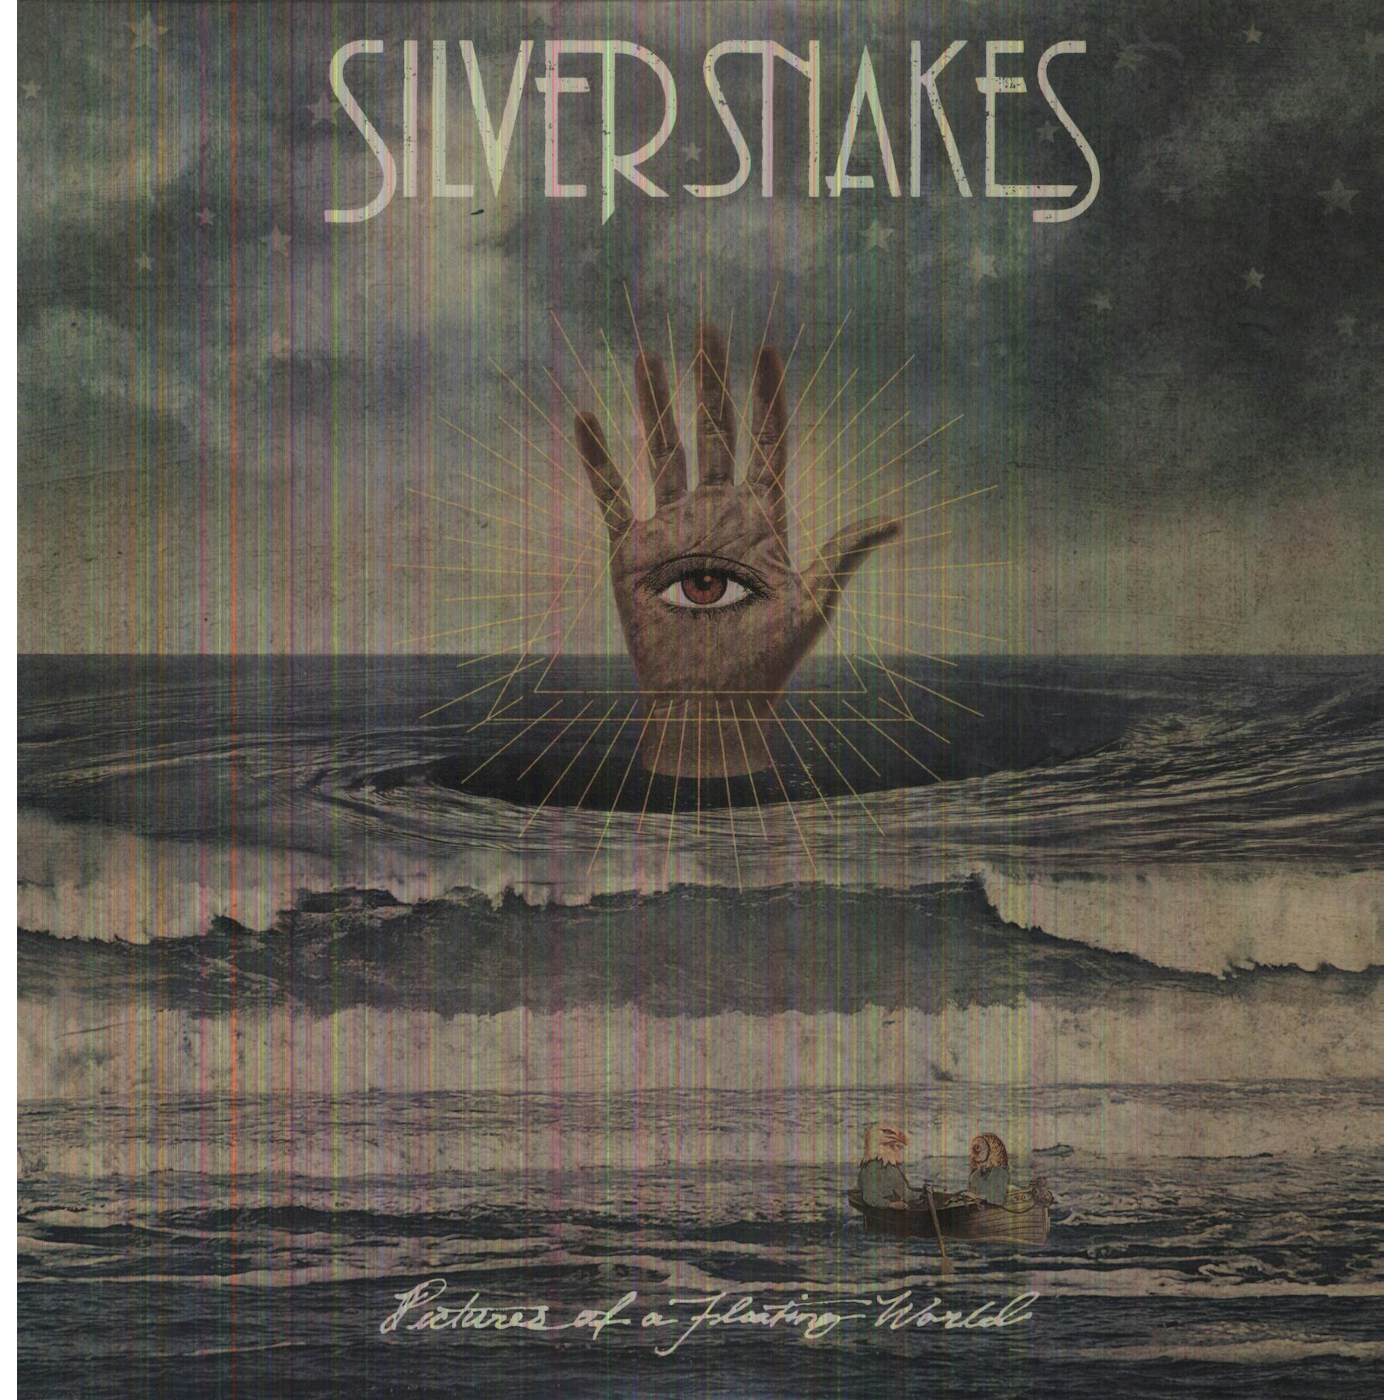 Silver Snakes Pictures of a Floating World Vinyl Record